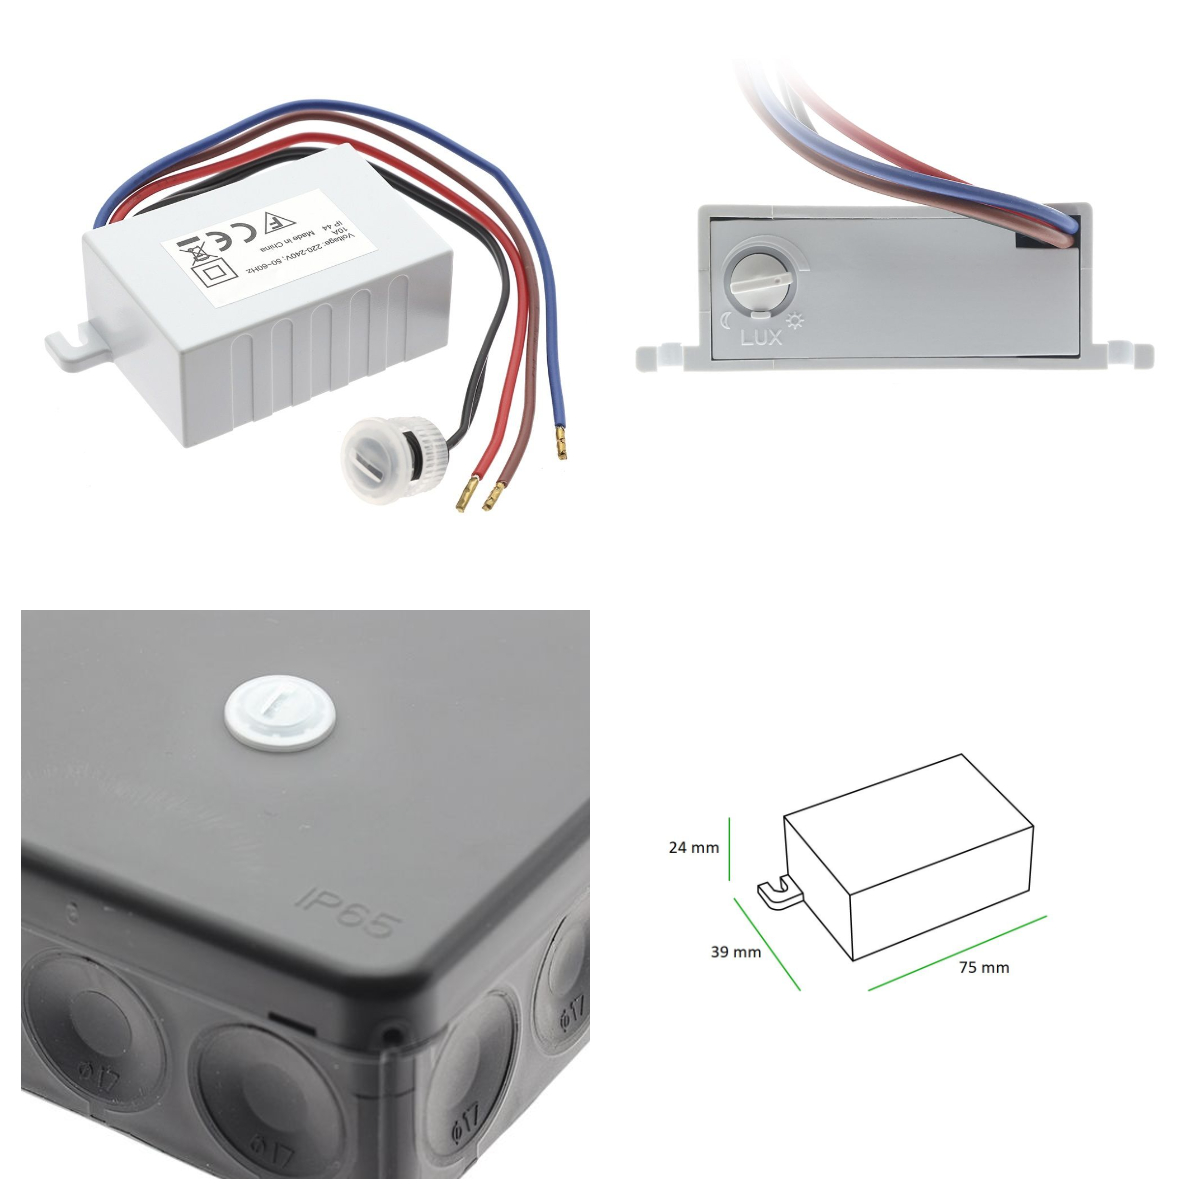 A dimmer switch can be installed in any location. For outdoor use, install in a box.